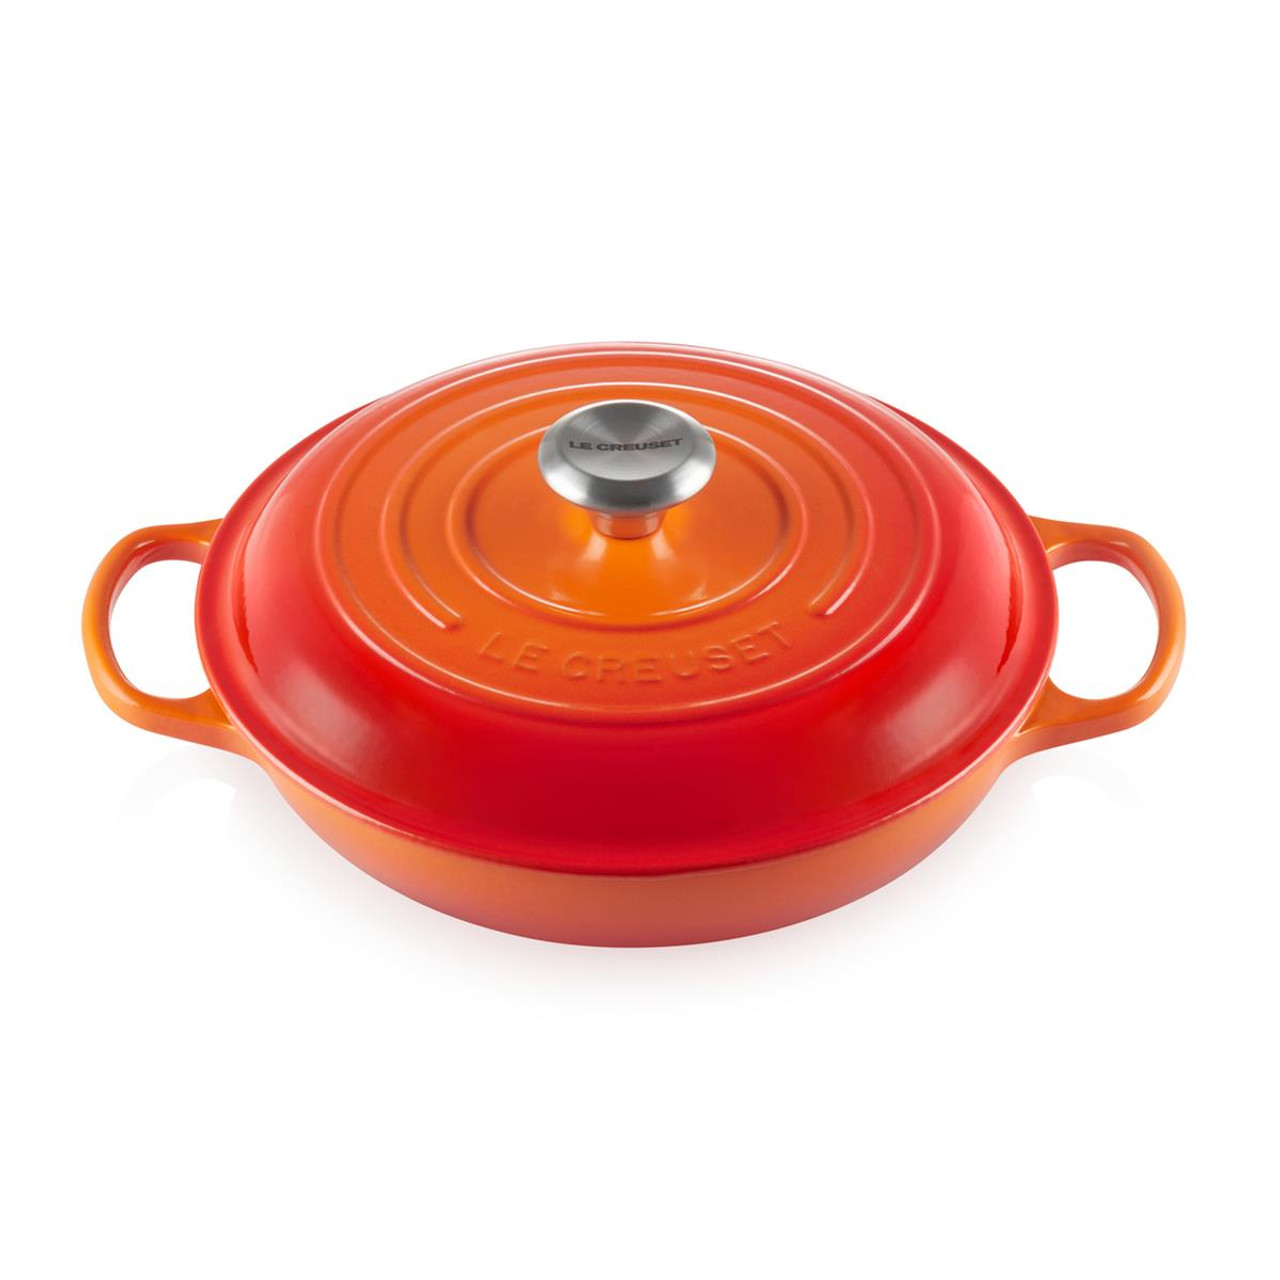 What is the ideal use for the 26cm Le Creuset cast iron casserole dish?